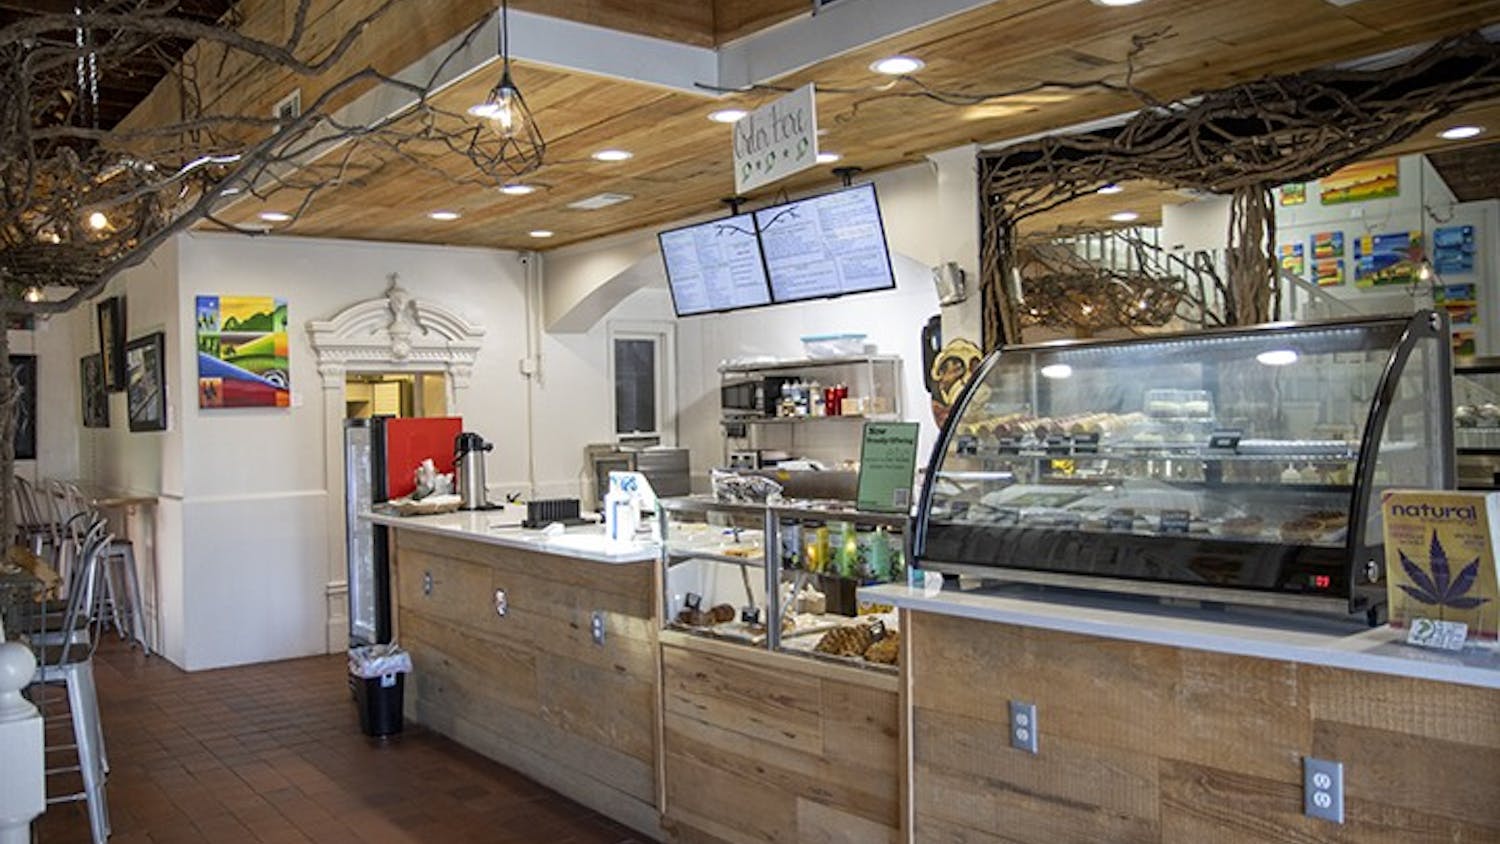 The Hideout, located in West Columbia’s River District, opened its doors on Jan. 13 for breakfast and lunch cafe-style dining. The Hideout is open all week from 7 a.m. to 3 p.m.